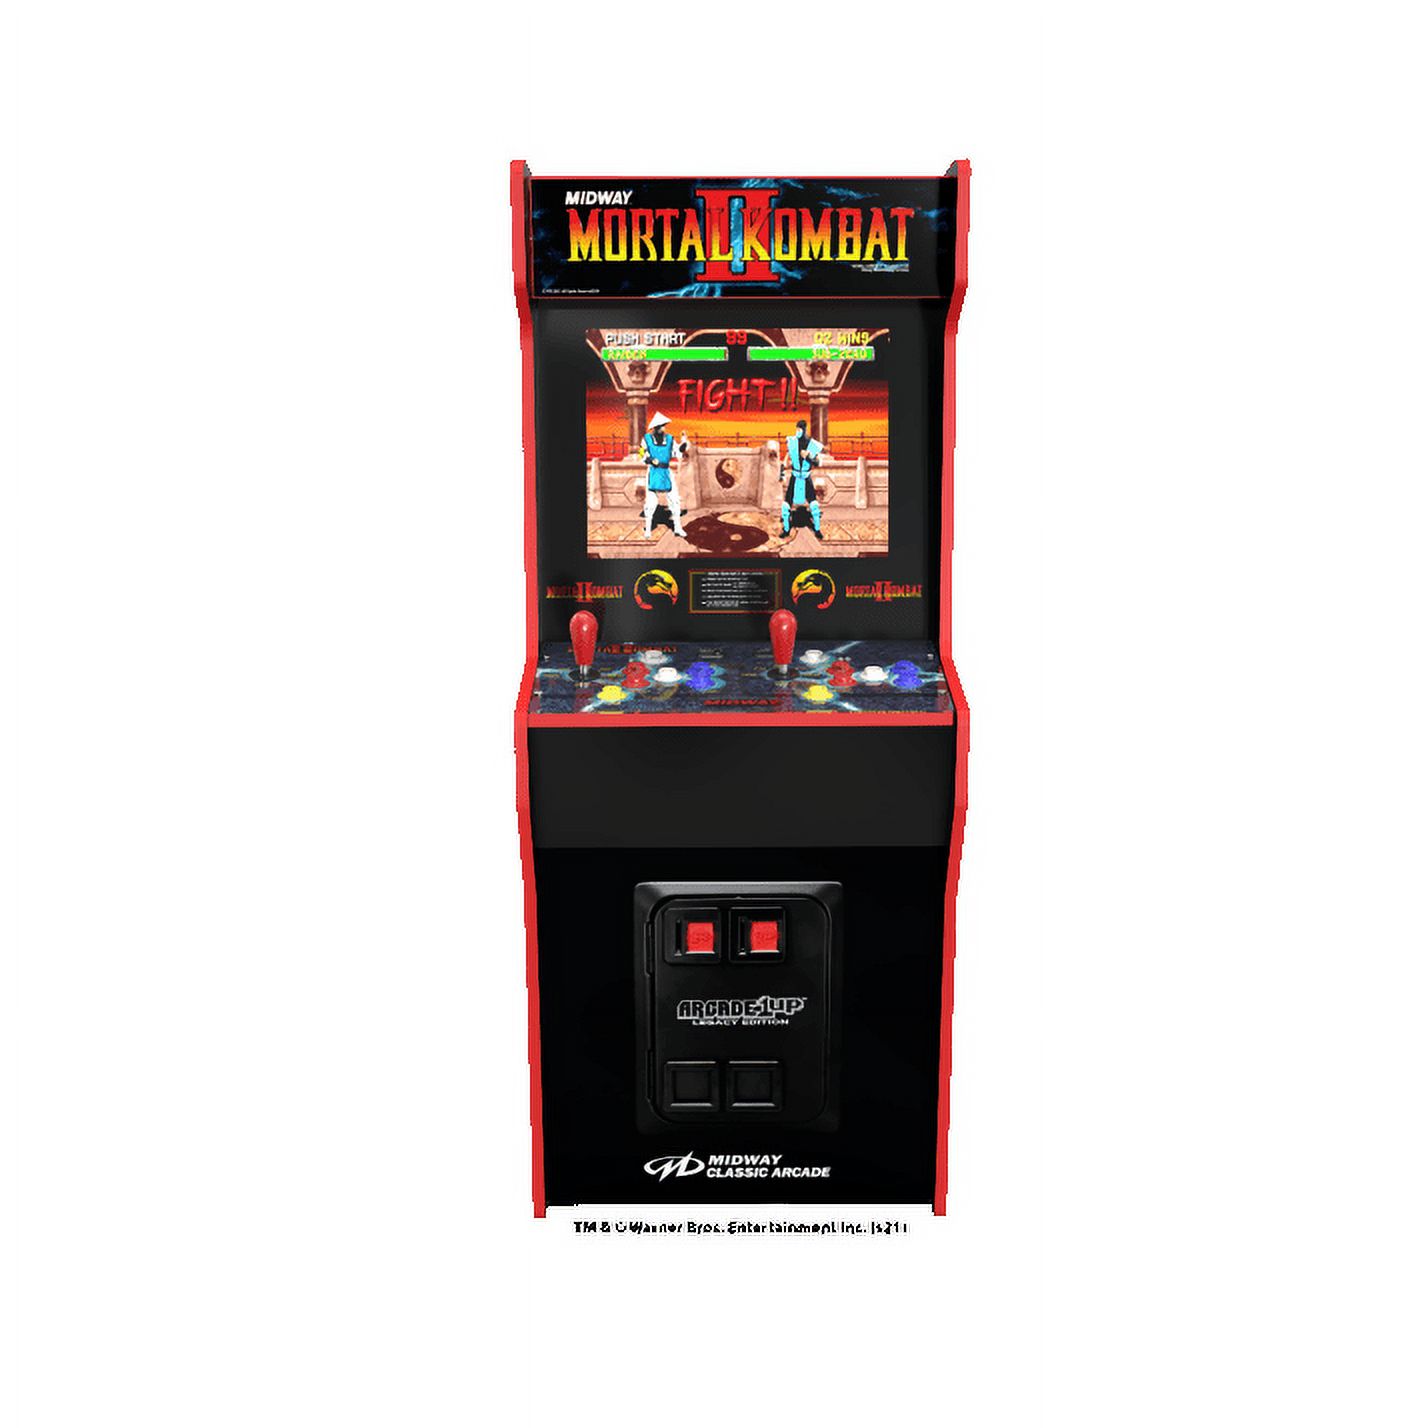 Arcade 1Up, Mortal Kombat Midway Legacy 12-in-1 without riser - image 1 of 10